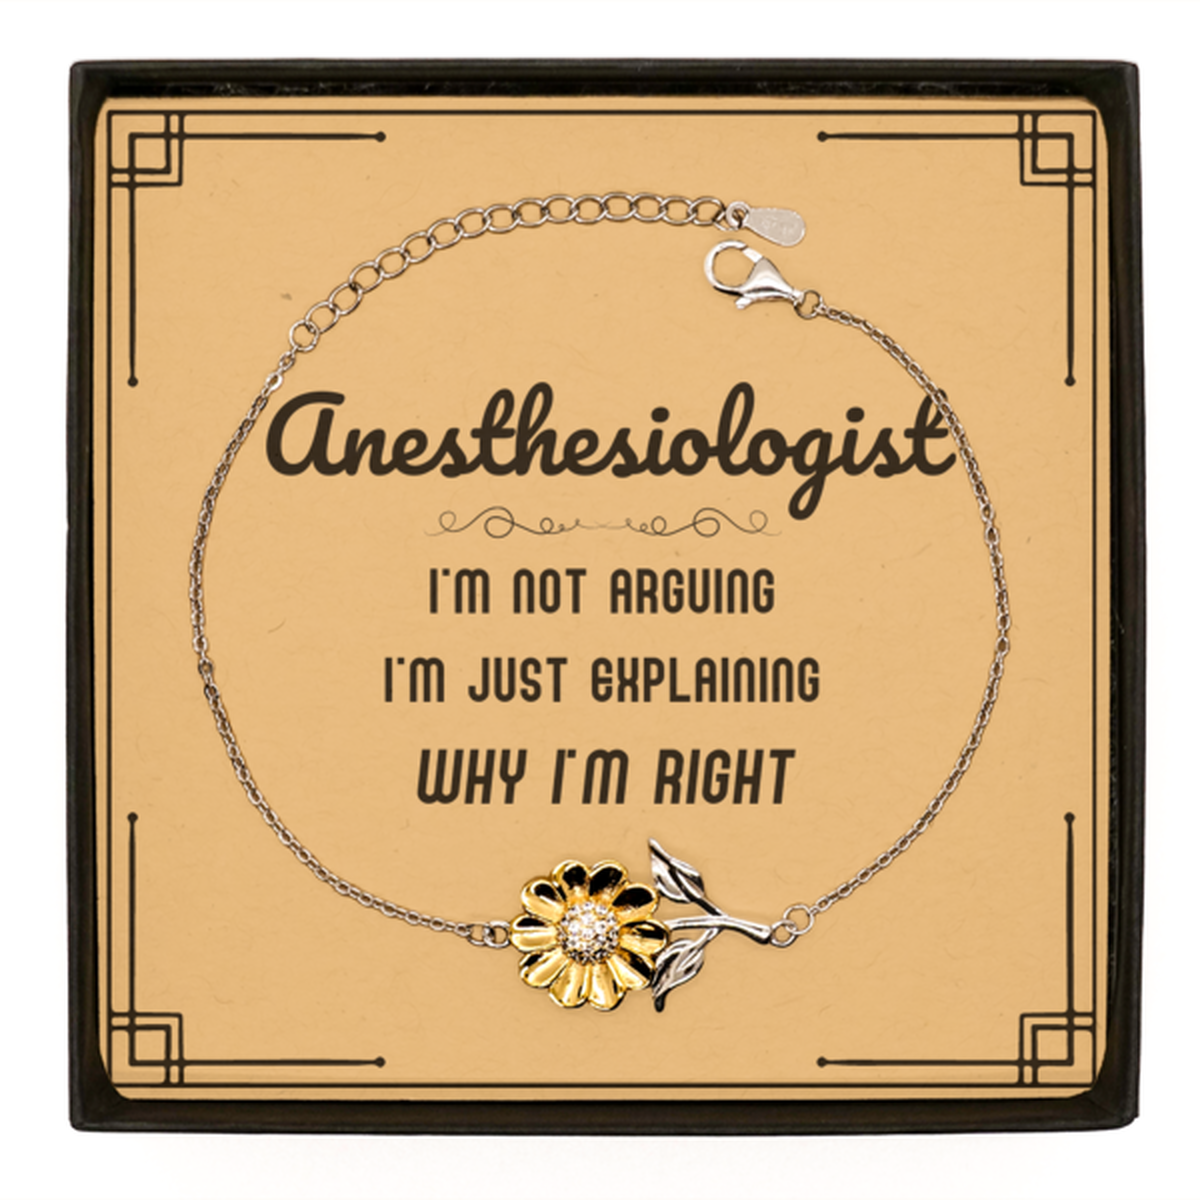 Anesthesiologist I'm not Arguing. I'm Just Explaining Why I'm RIGHT Sunflower Bracelet, Funny Saying Quote Anesthesiologist Gifts For Anesthesiologist Message Card Graduation Birthday Christmas Gifts for Men Women Coworker